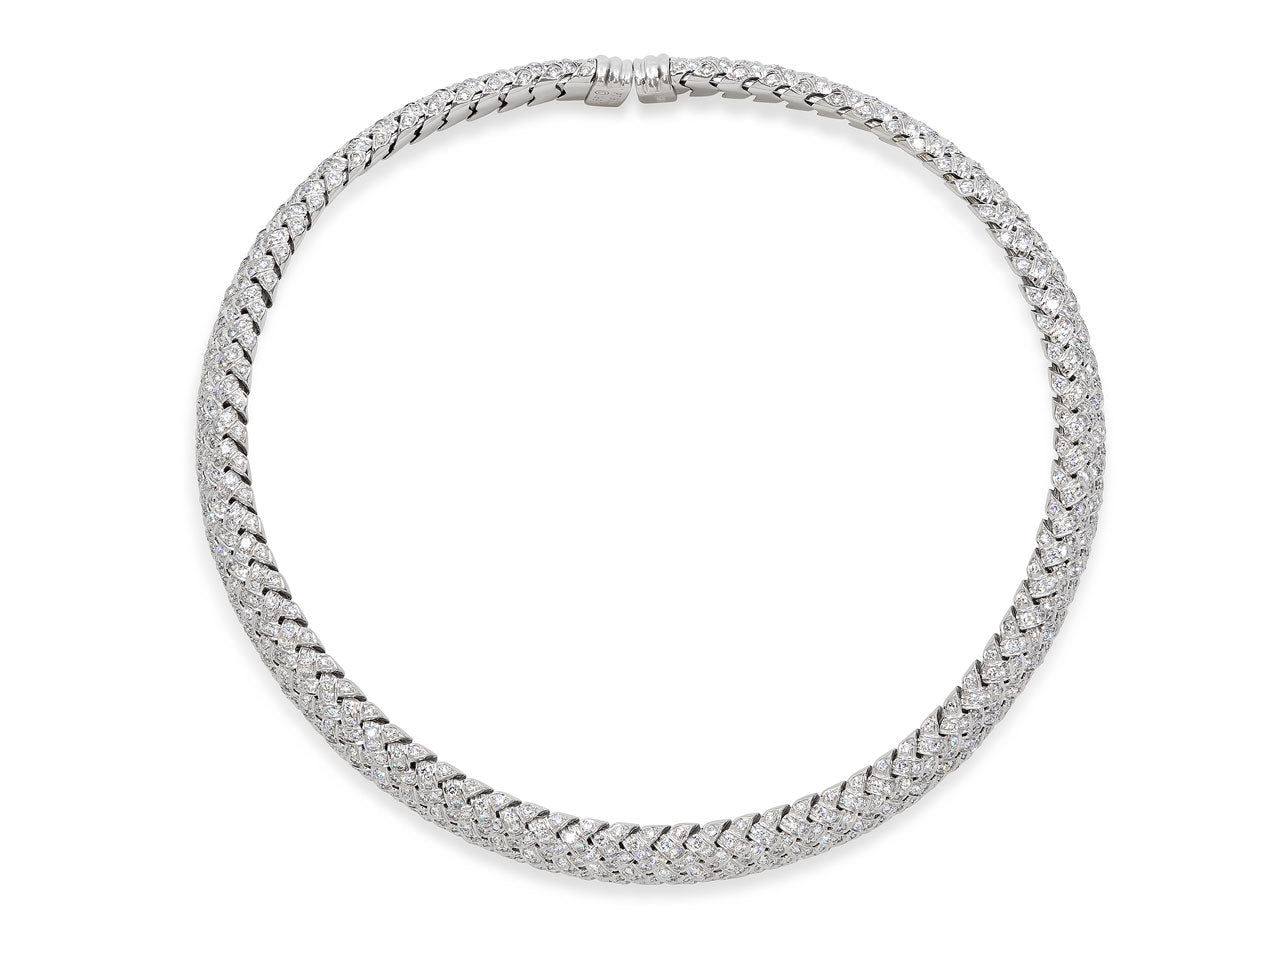 Tiffany & Co. 'Vannerie' Diamond Necklace in Platinum